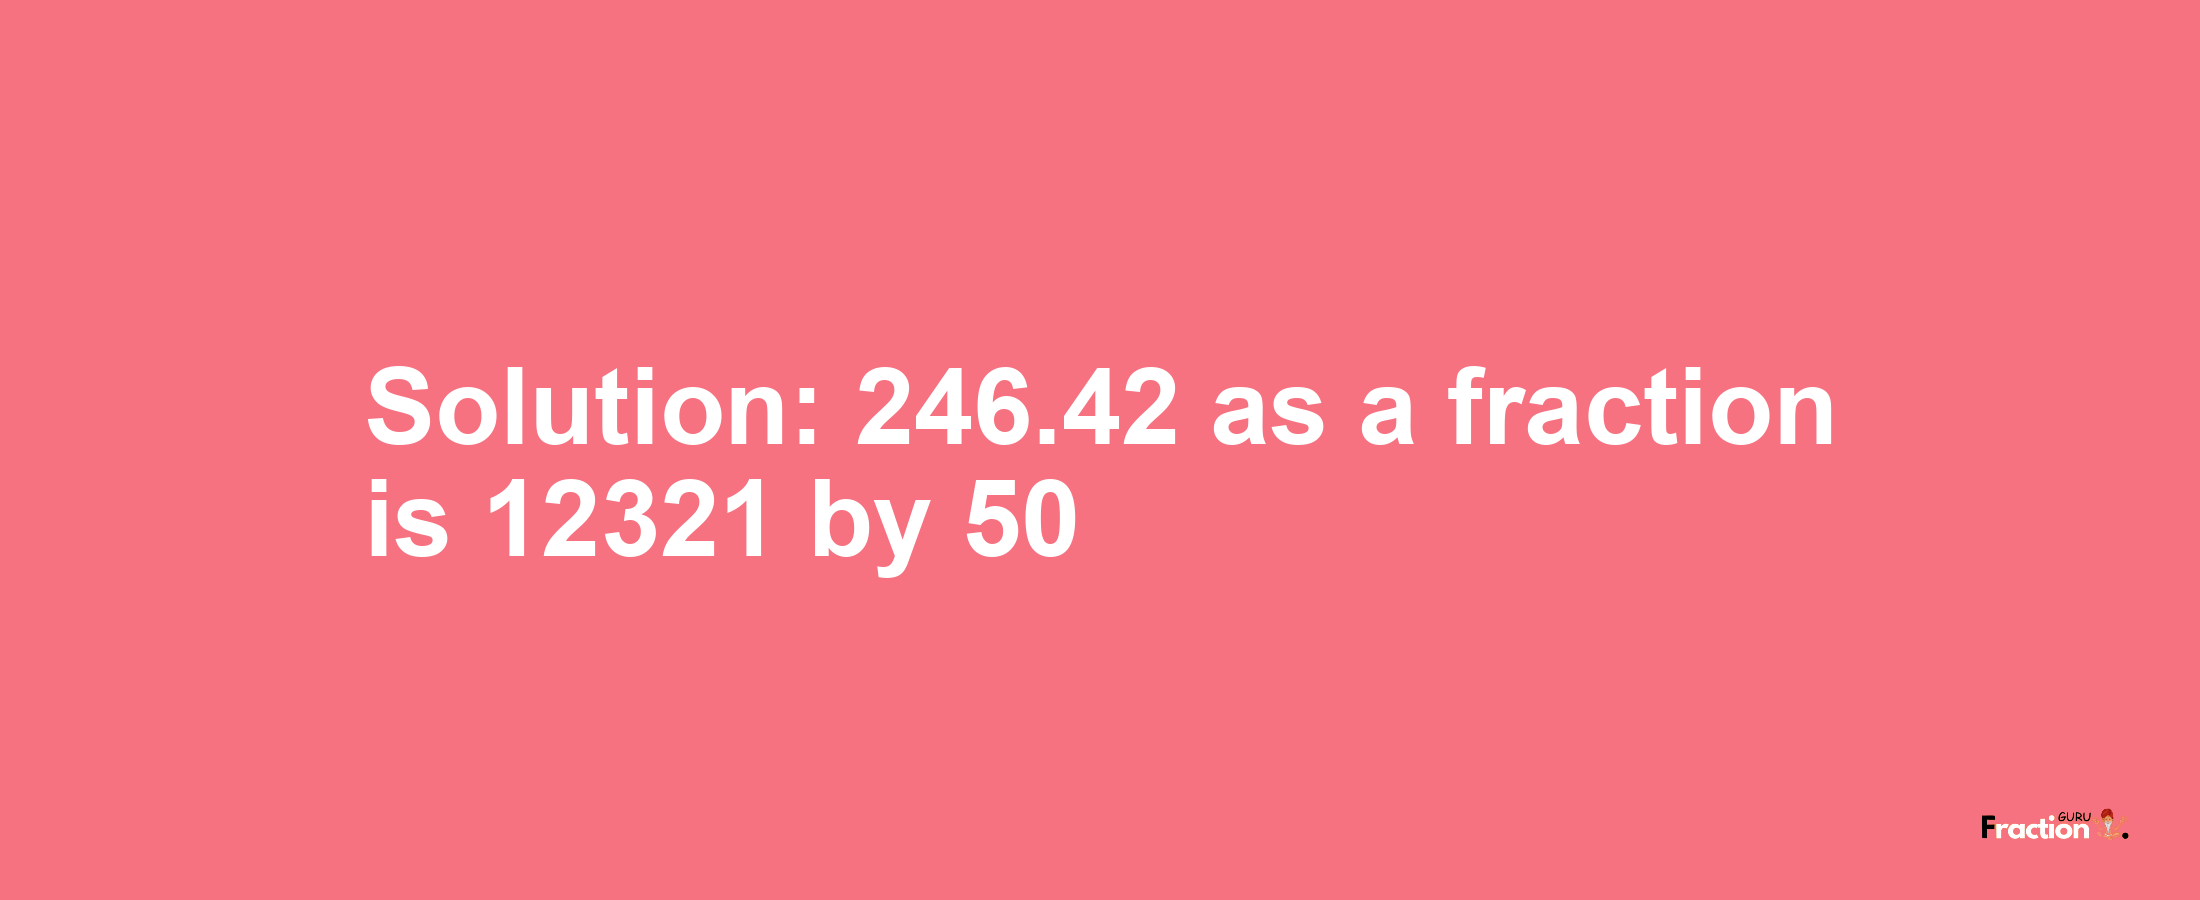 Solution:246.42 as a fraction is 12321/50